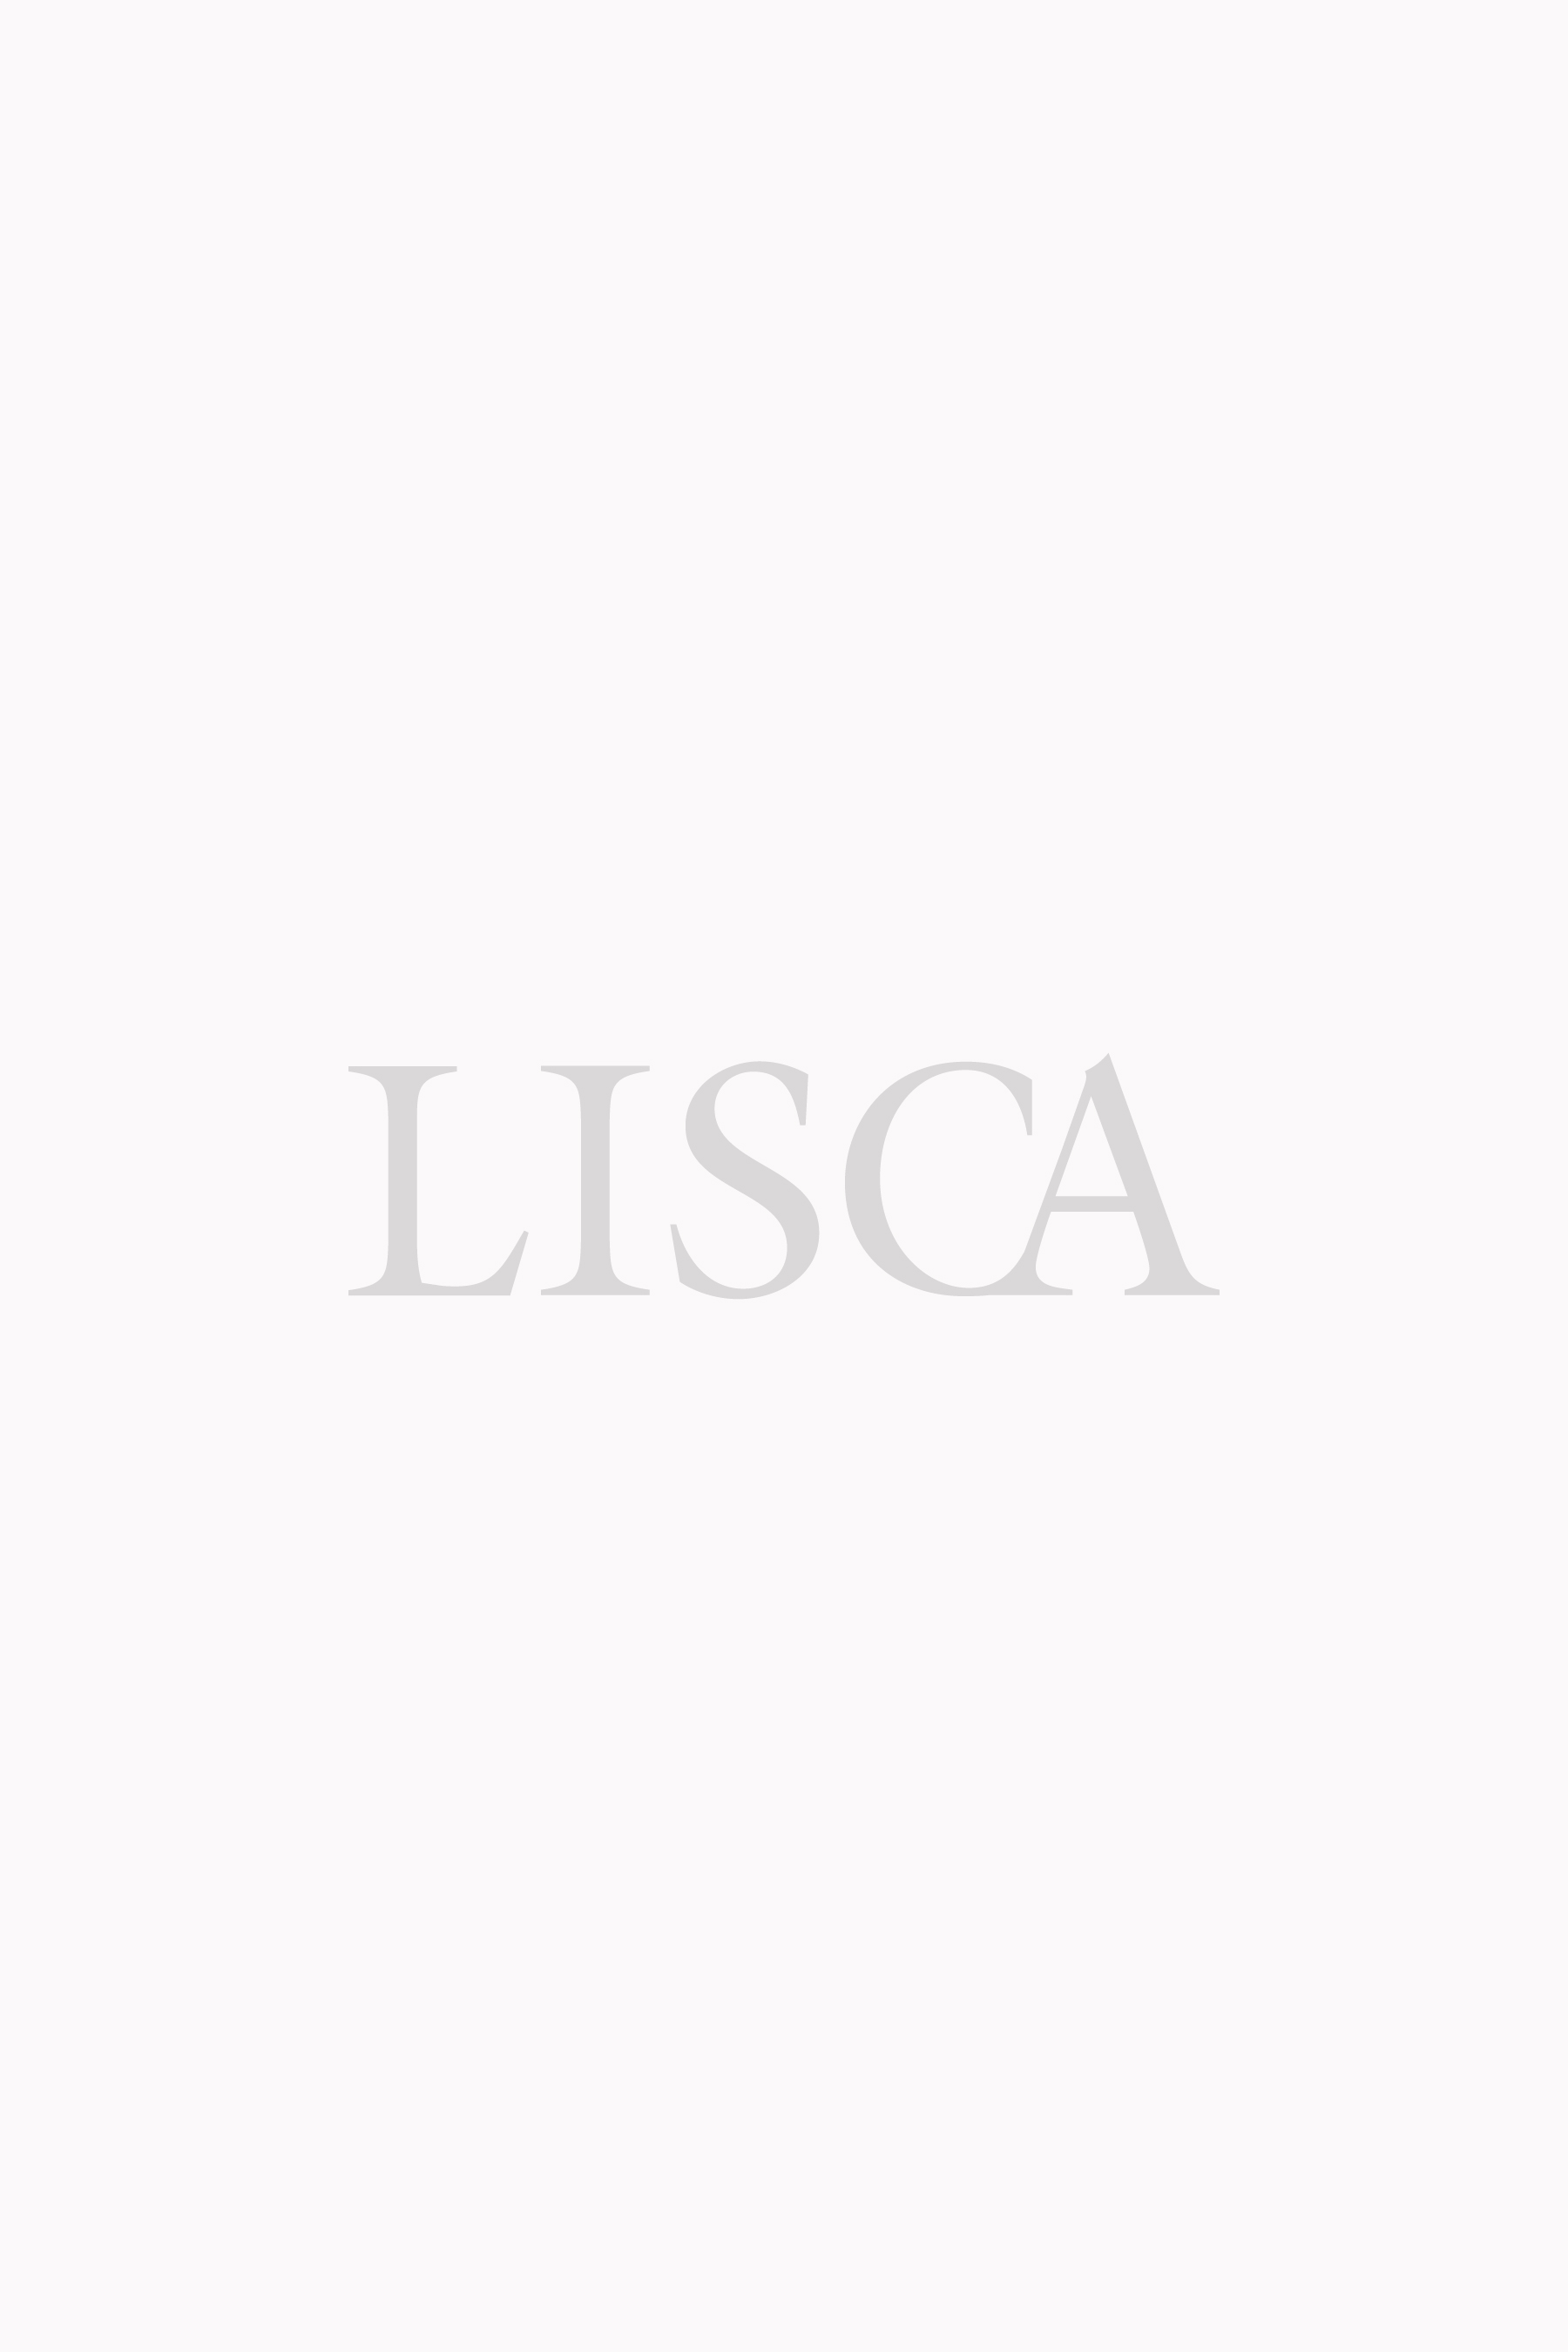 Lisca Showroom - Moscow